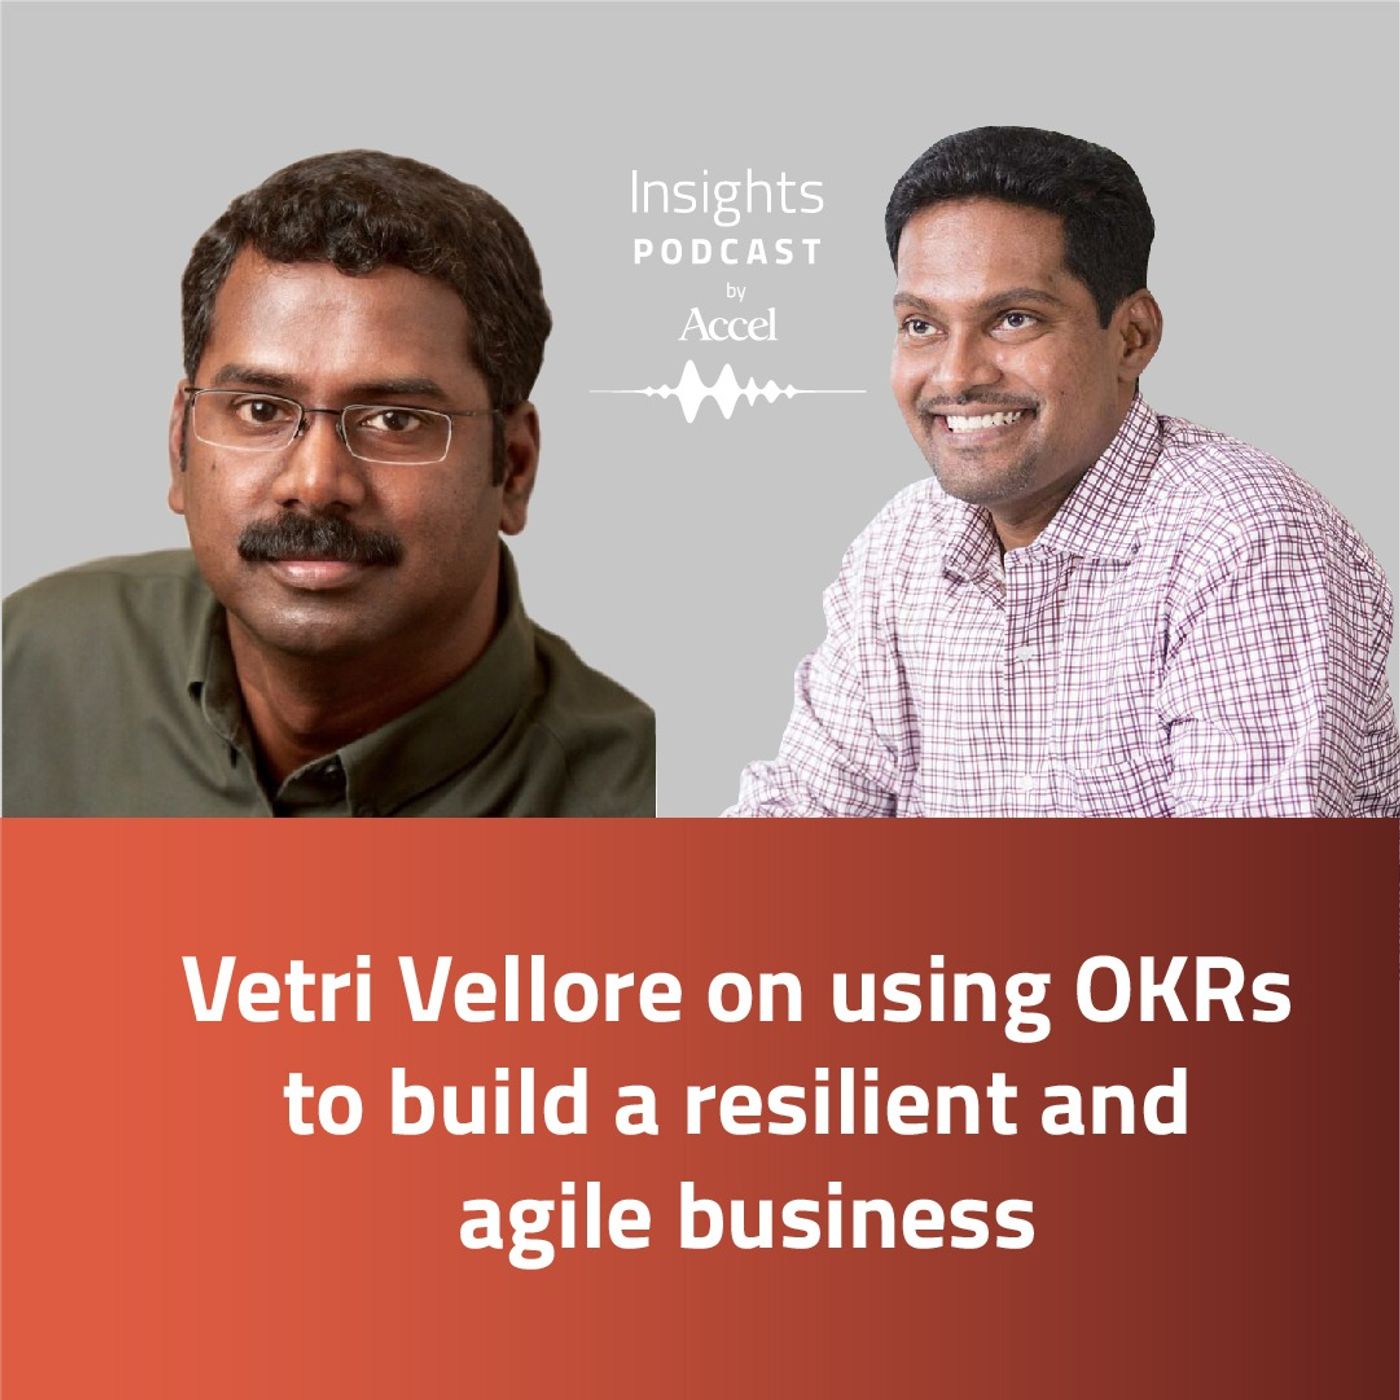 INSIGHTS #55 – Vetri Vellore on using OKRs to build a resilient and agile business